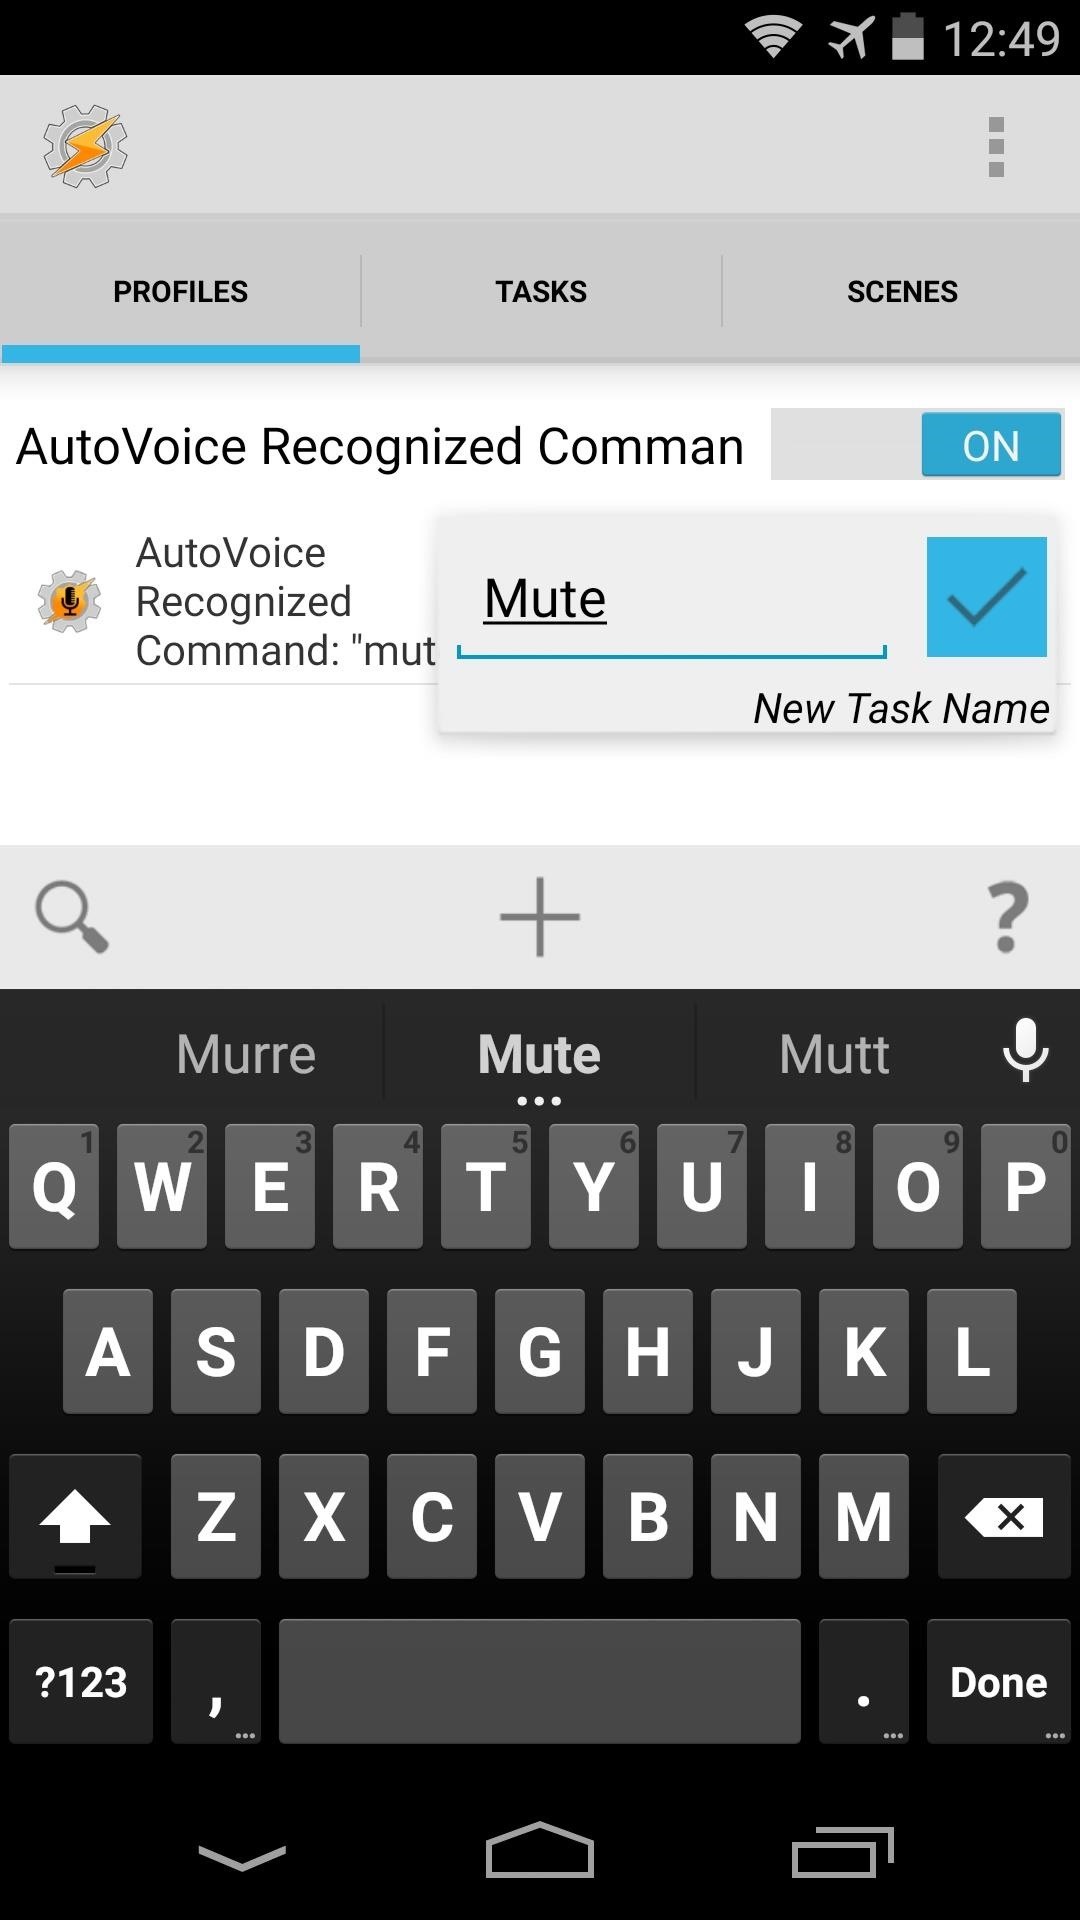 How to Make Google Now Obey Custom Voice Commands—Even Without Root